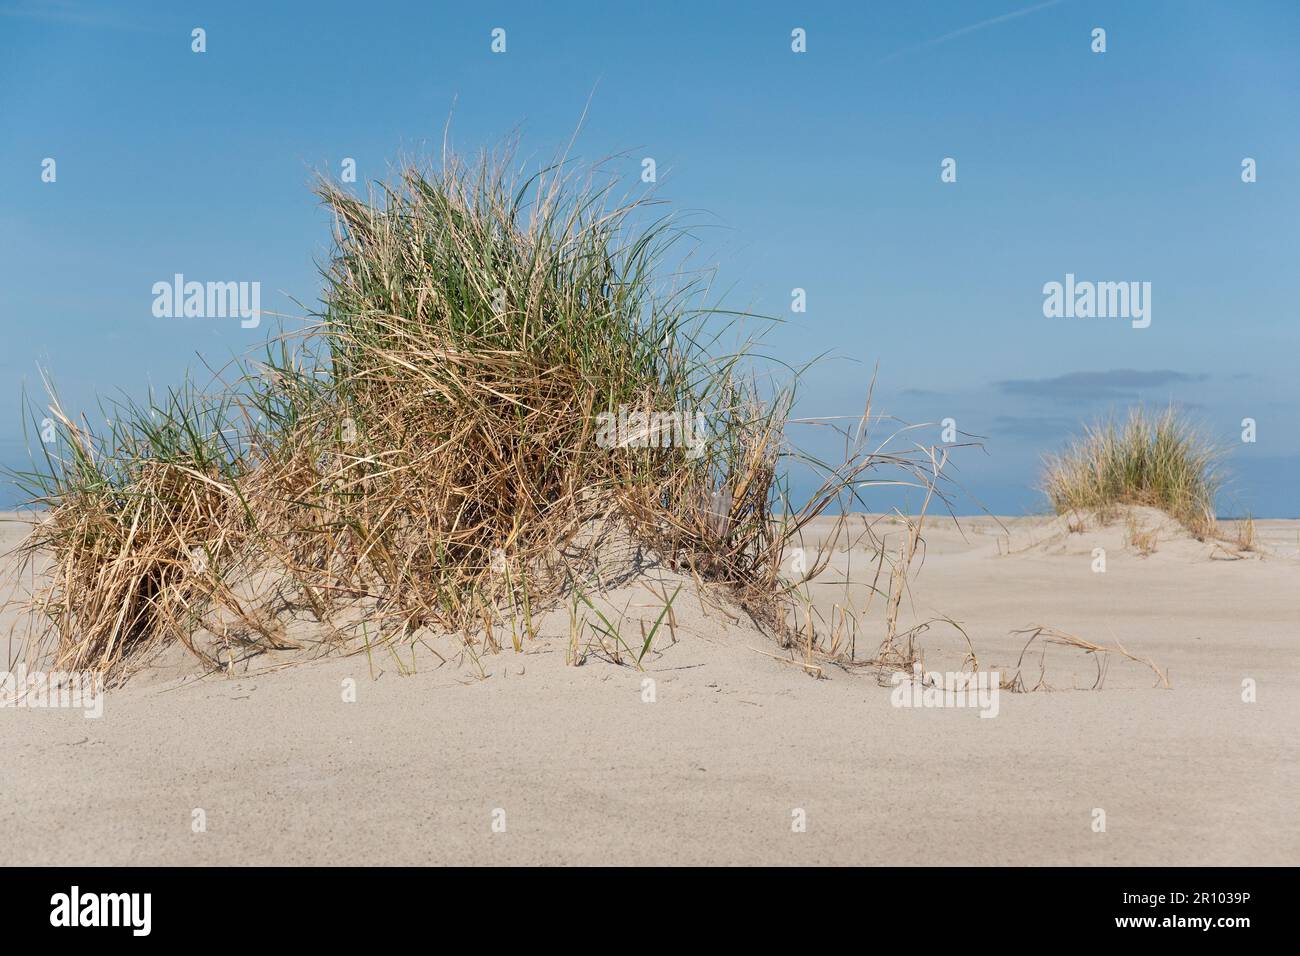 Dune forming on a beach: Marram grass catches sand and forms embryonic dunes Stock Photo